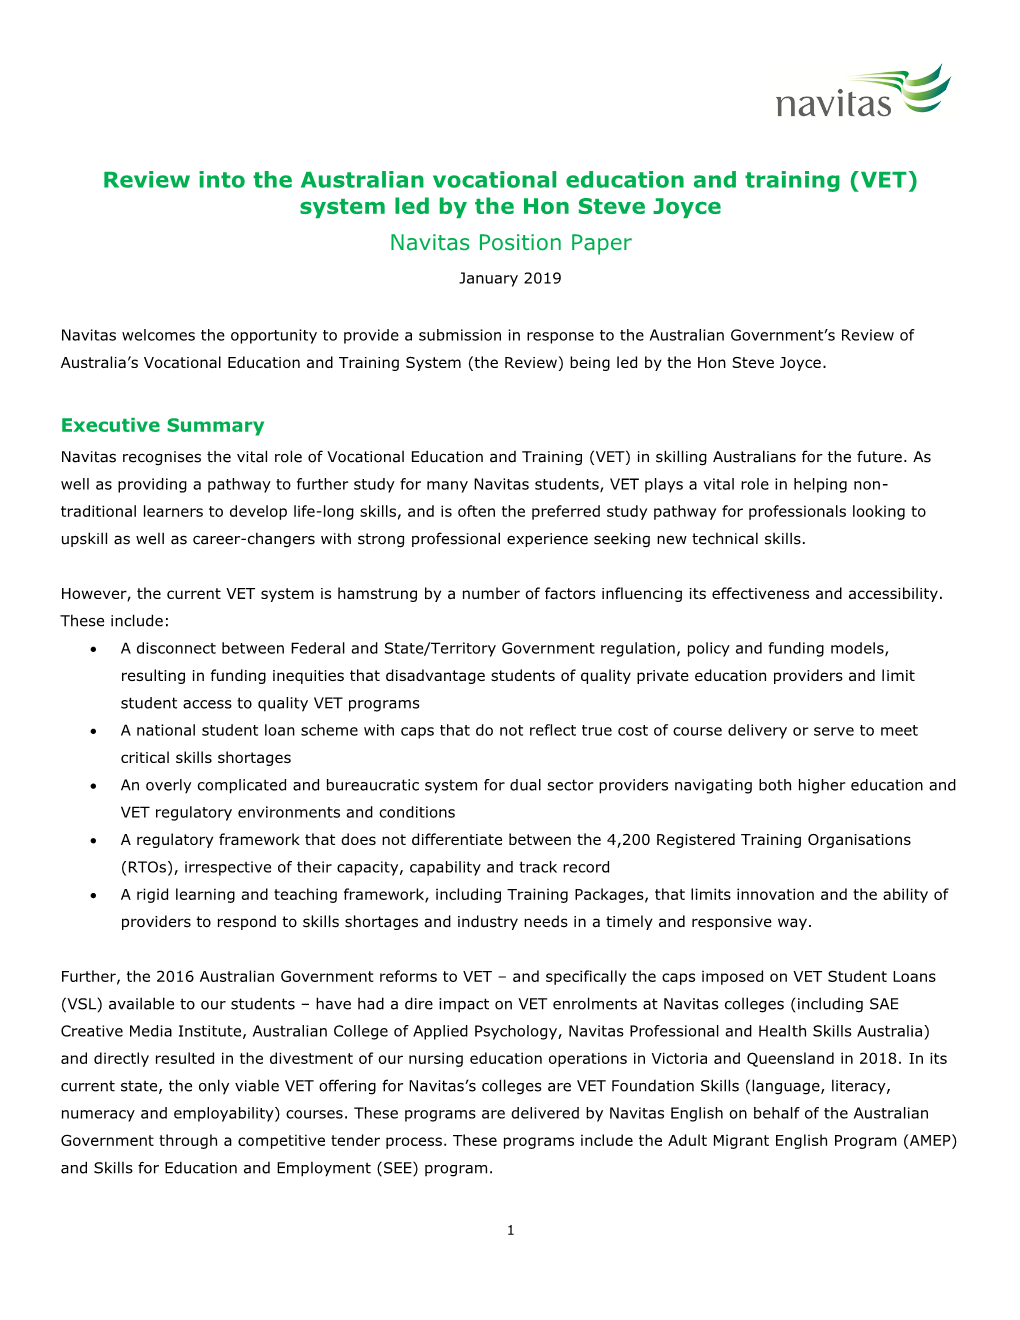 Review Into the Australian Vocational Education and Training (VET) System Led by the Hon Steve Joyce Navitas Position Paper